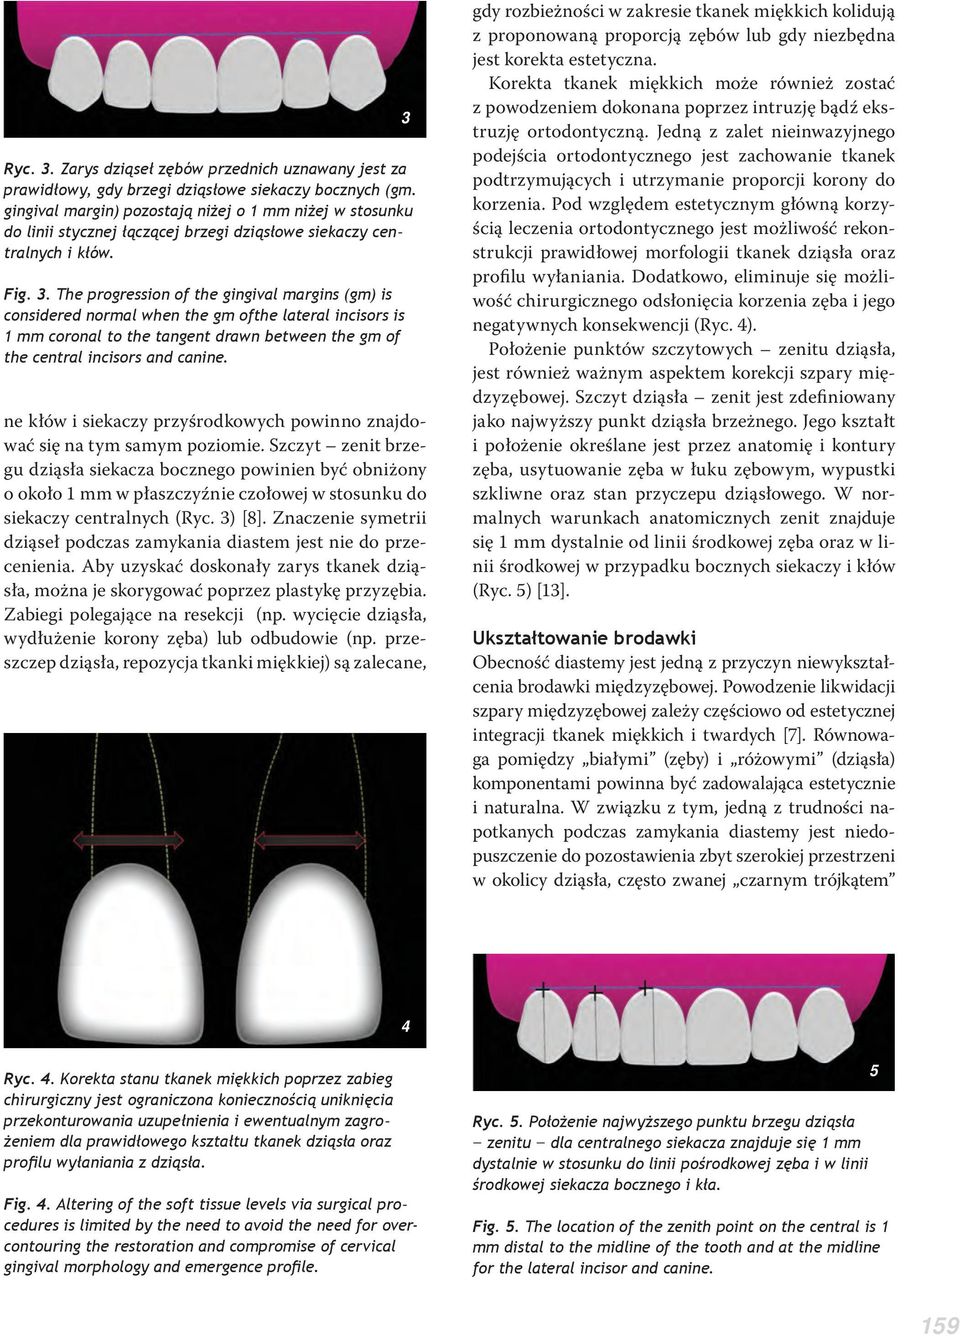 The progression of the gingival margins (gm) is considered normal when the gm ofthe lateral incisors is 1 mm coronal to the tangent drawn between the gm of the central incisors and canine.